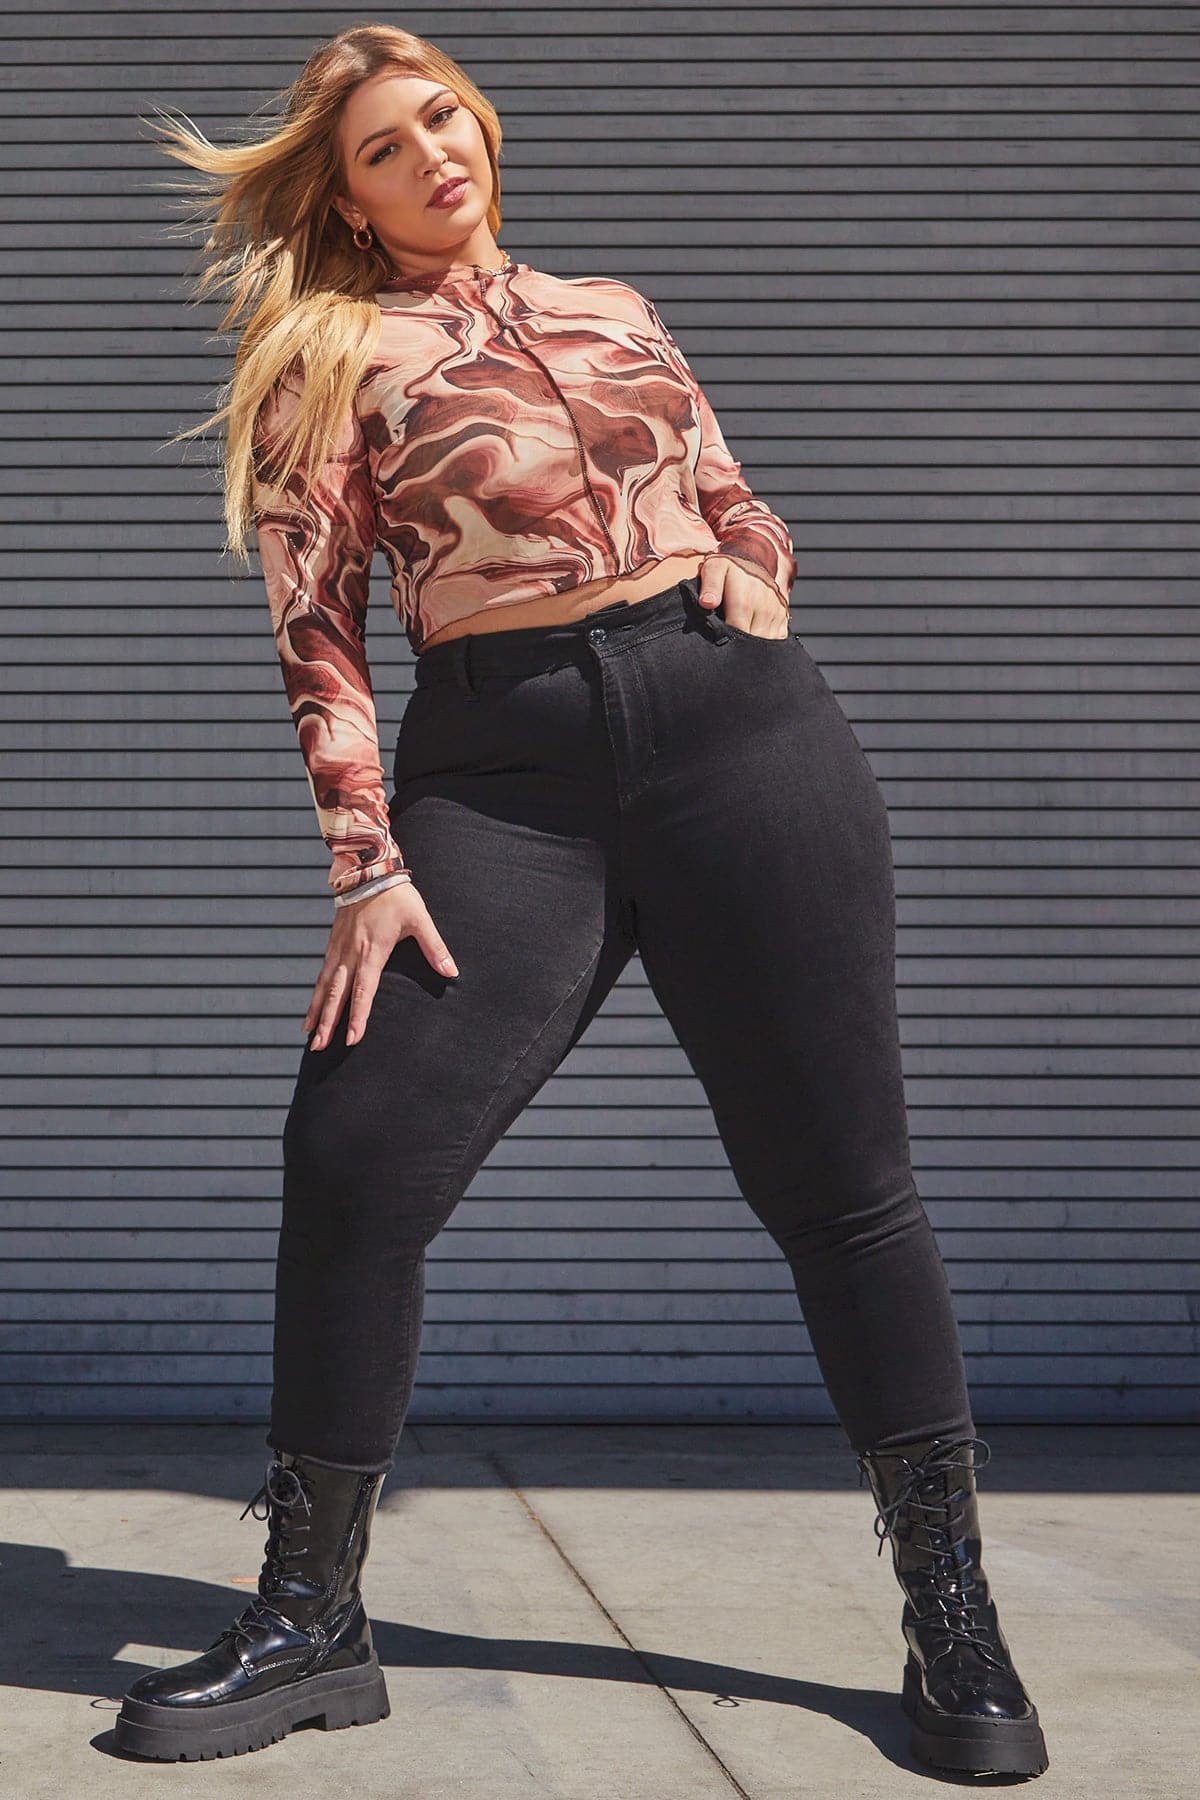 Women's Plus Size Sustainable Essential Skinny Jeans-Sale